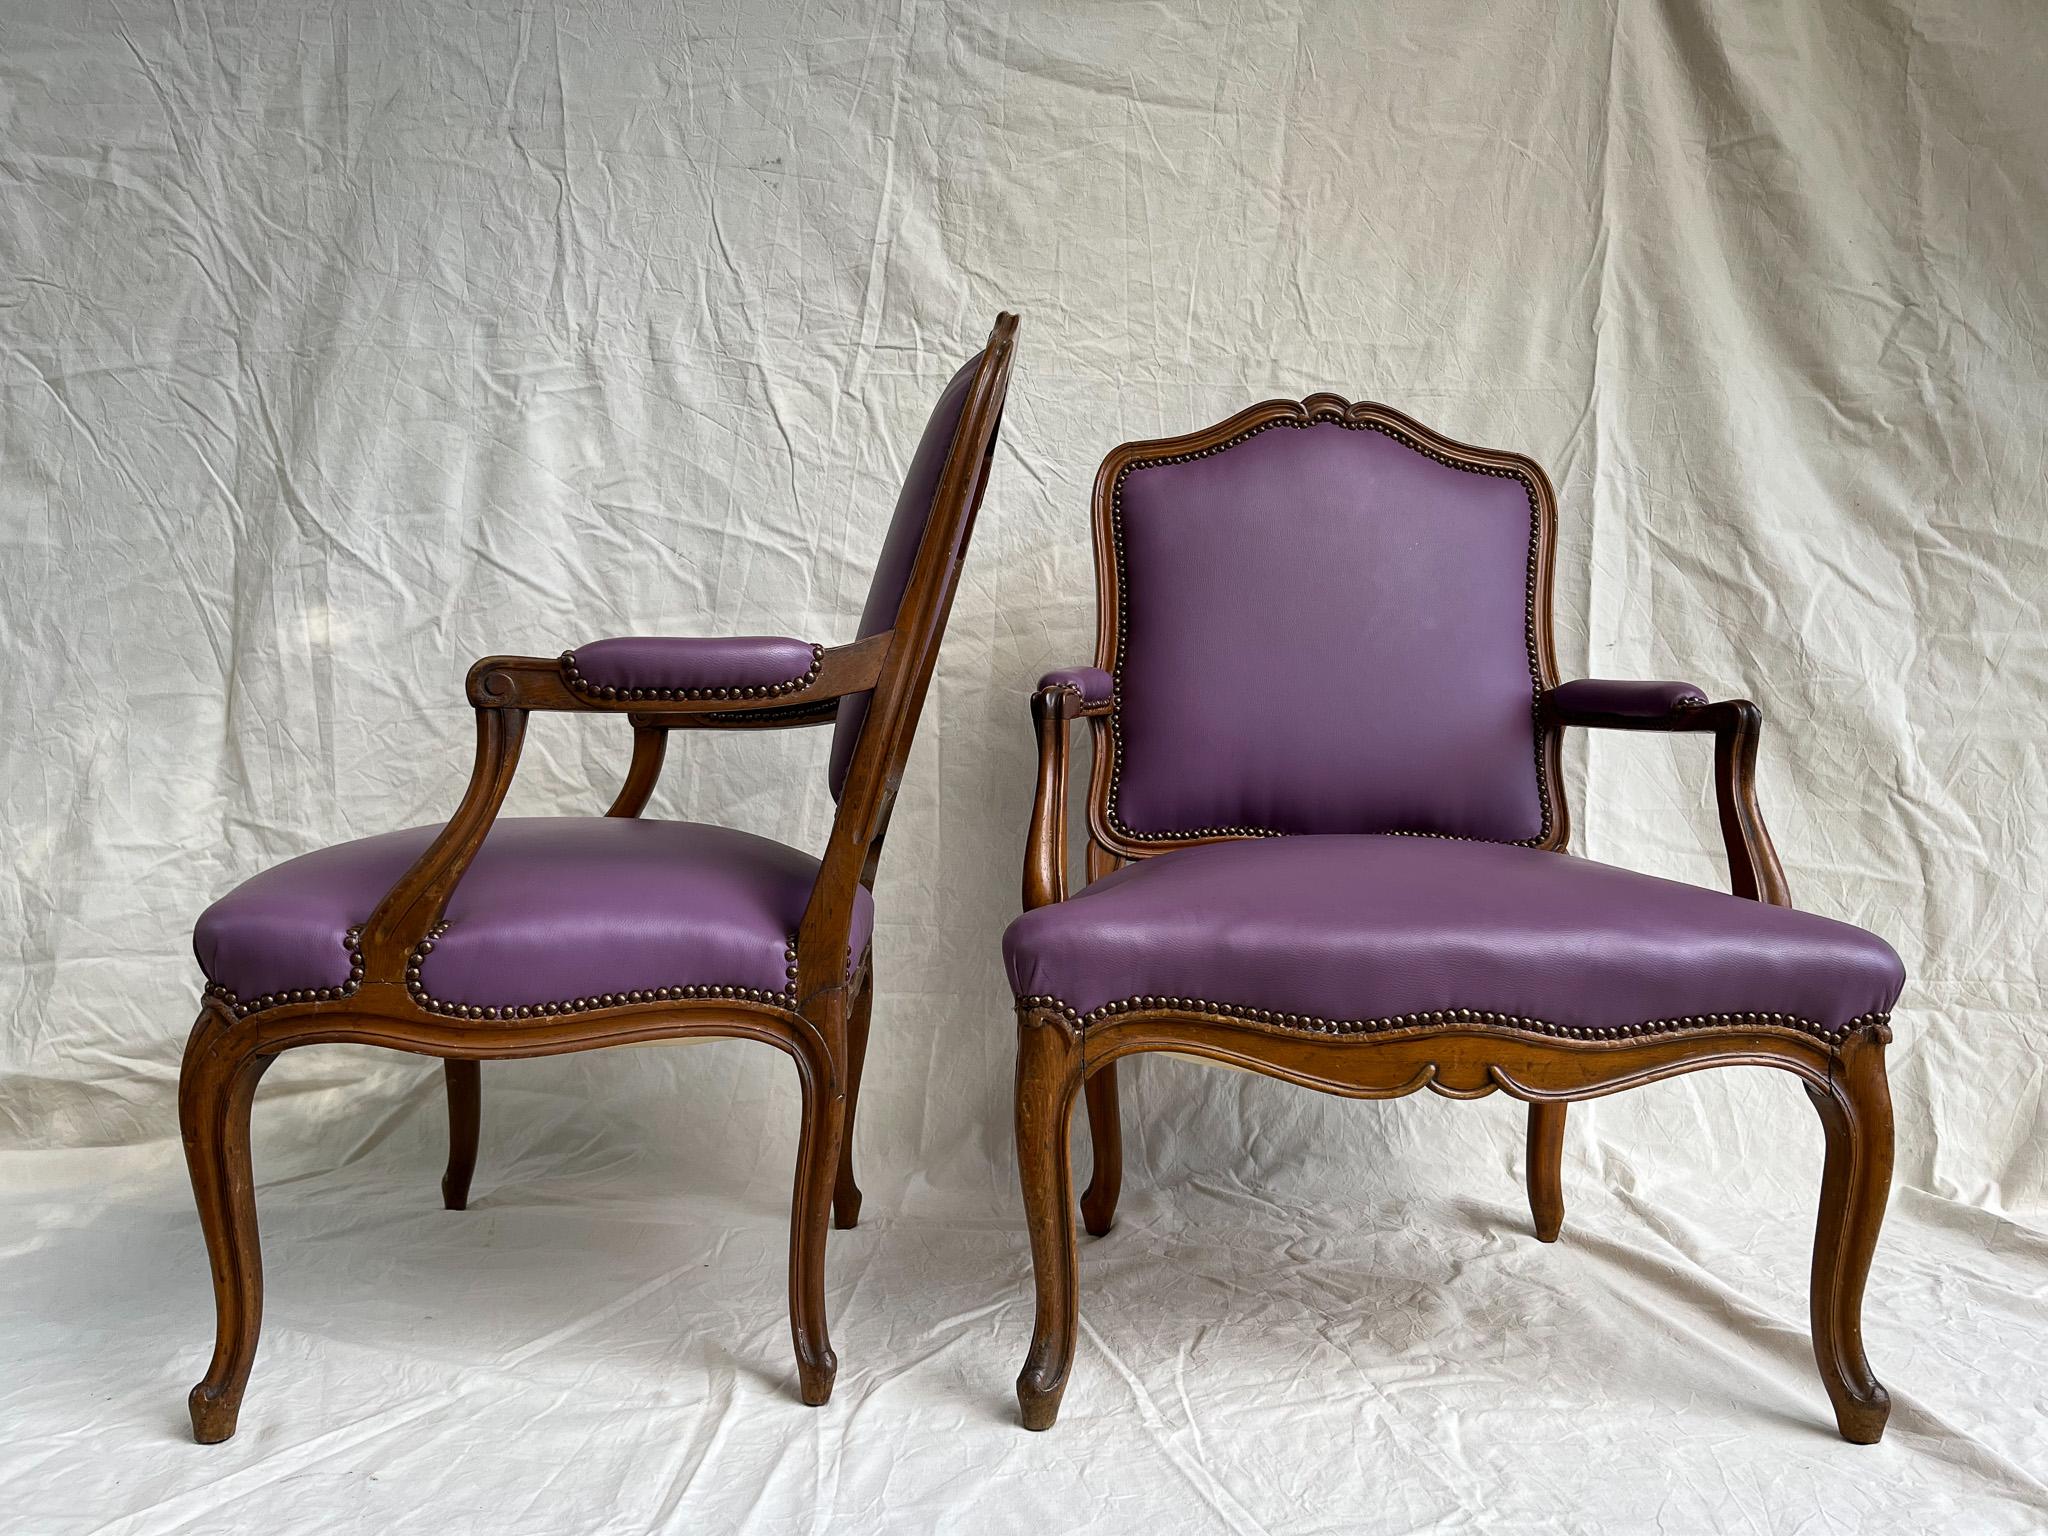 Set of Two Louis XVI Chairs, in Carved Walnut, France, 18th Century '1774-1791' For Sale 1